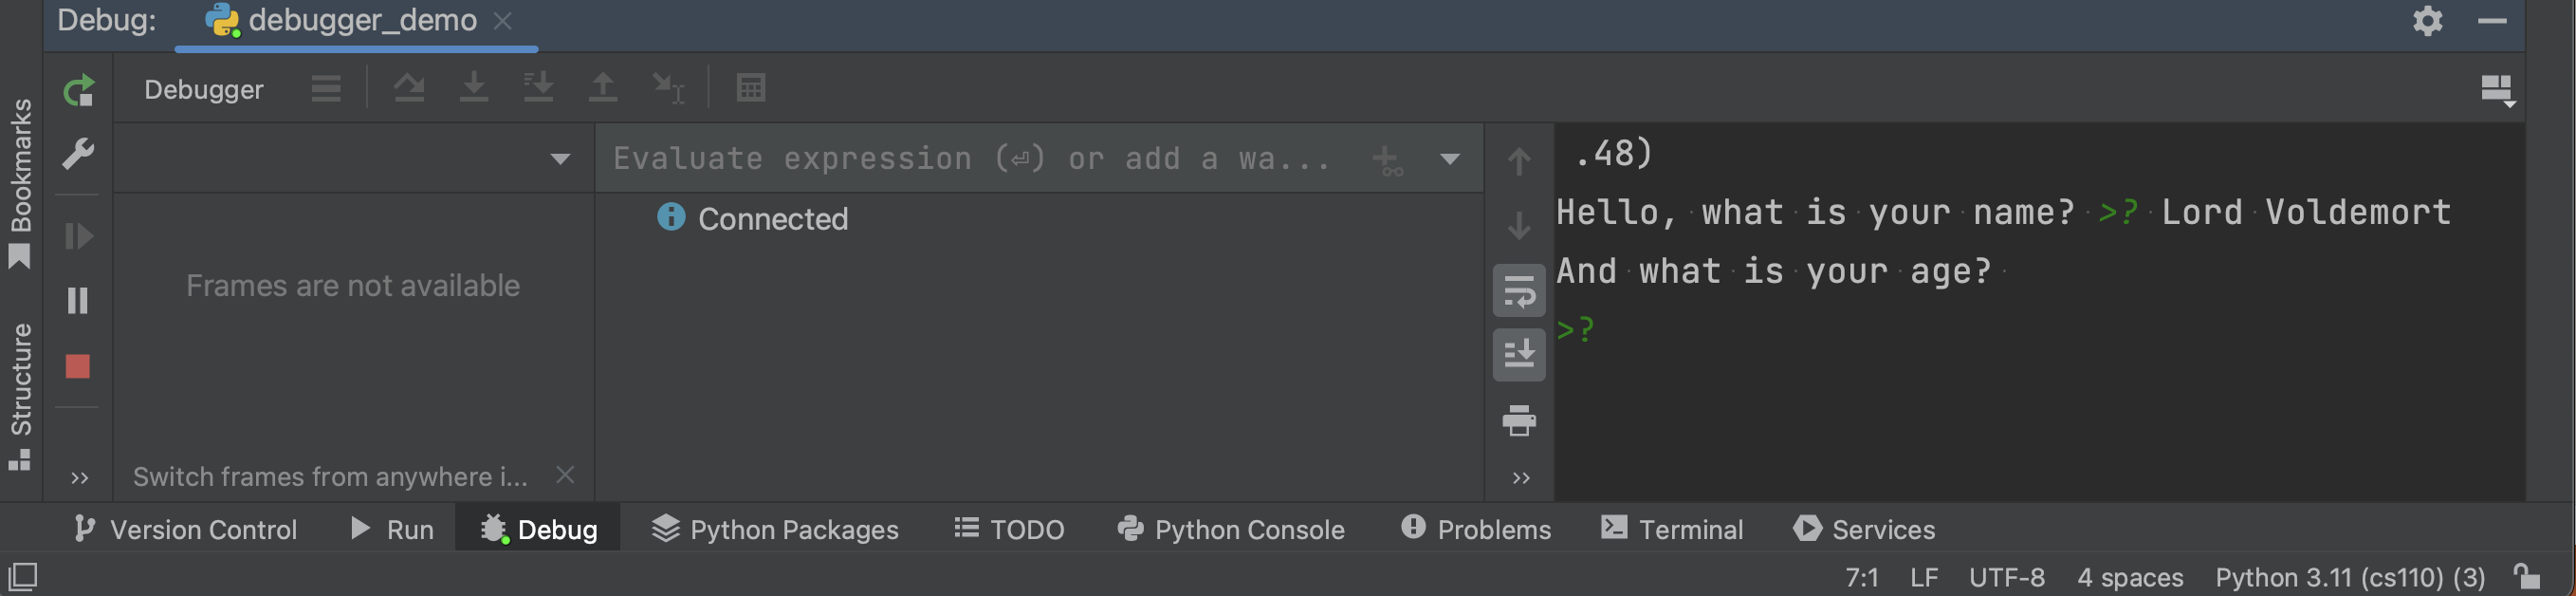 Pycharm console waiting for input again